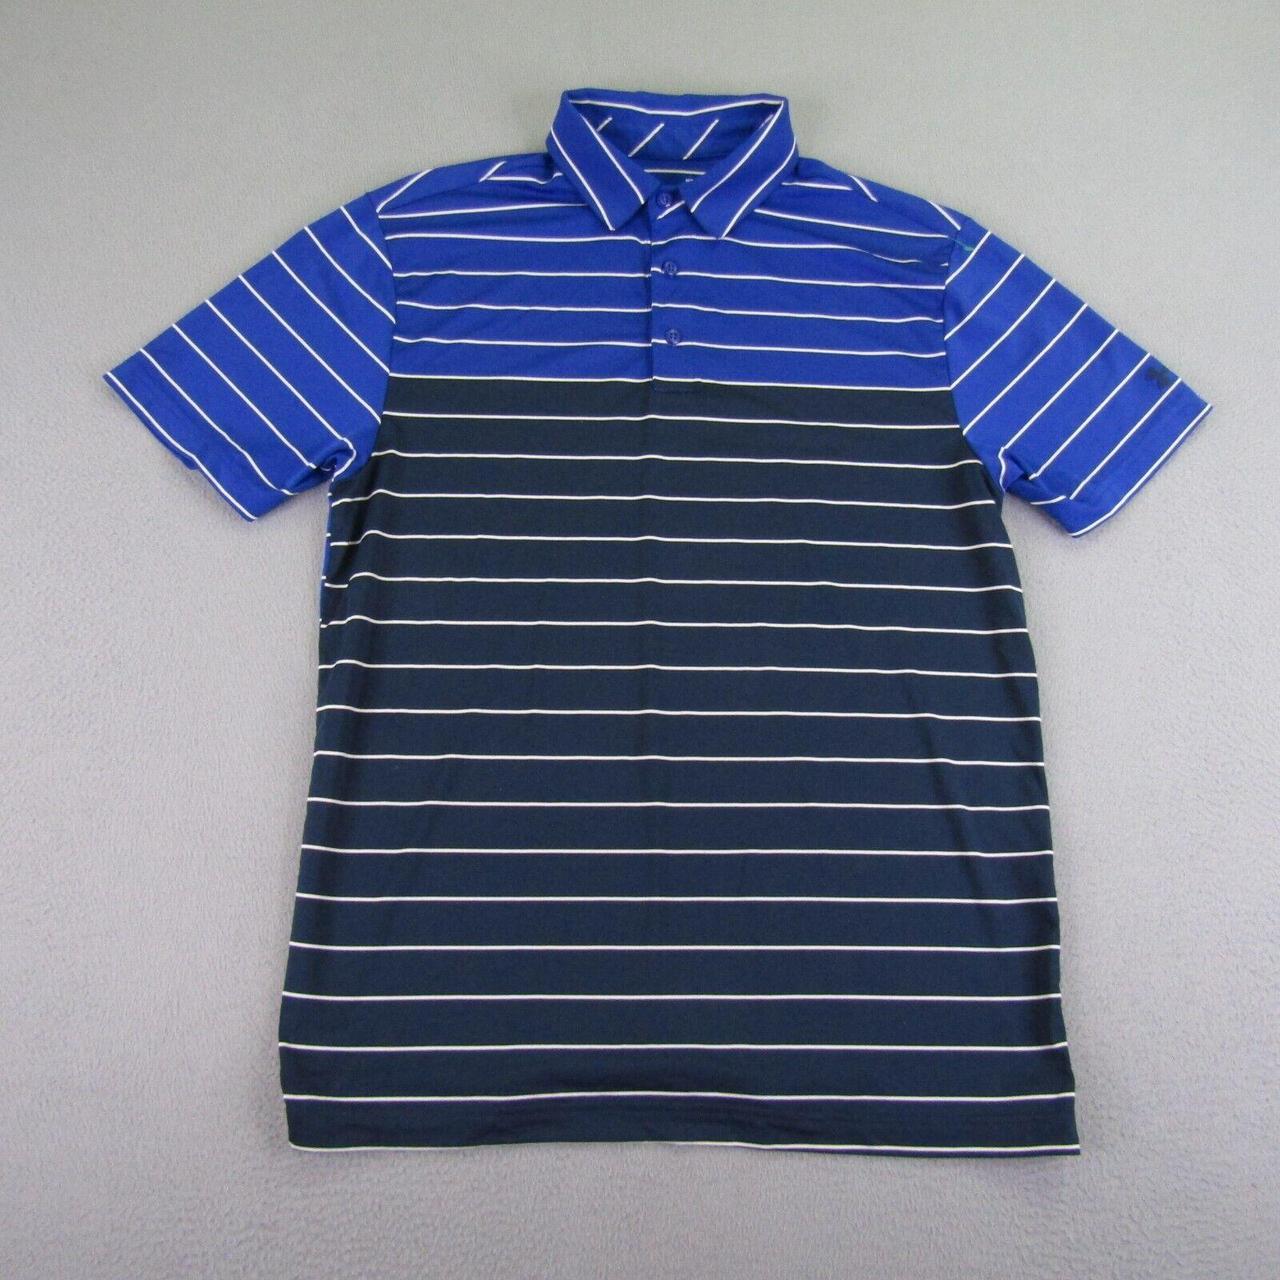 Under Armour Men's Blue and White Polo-shirts